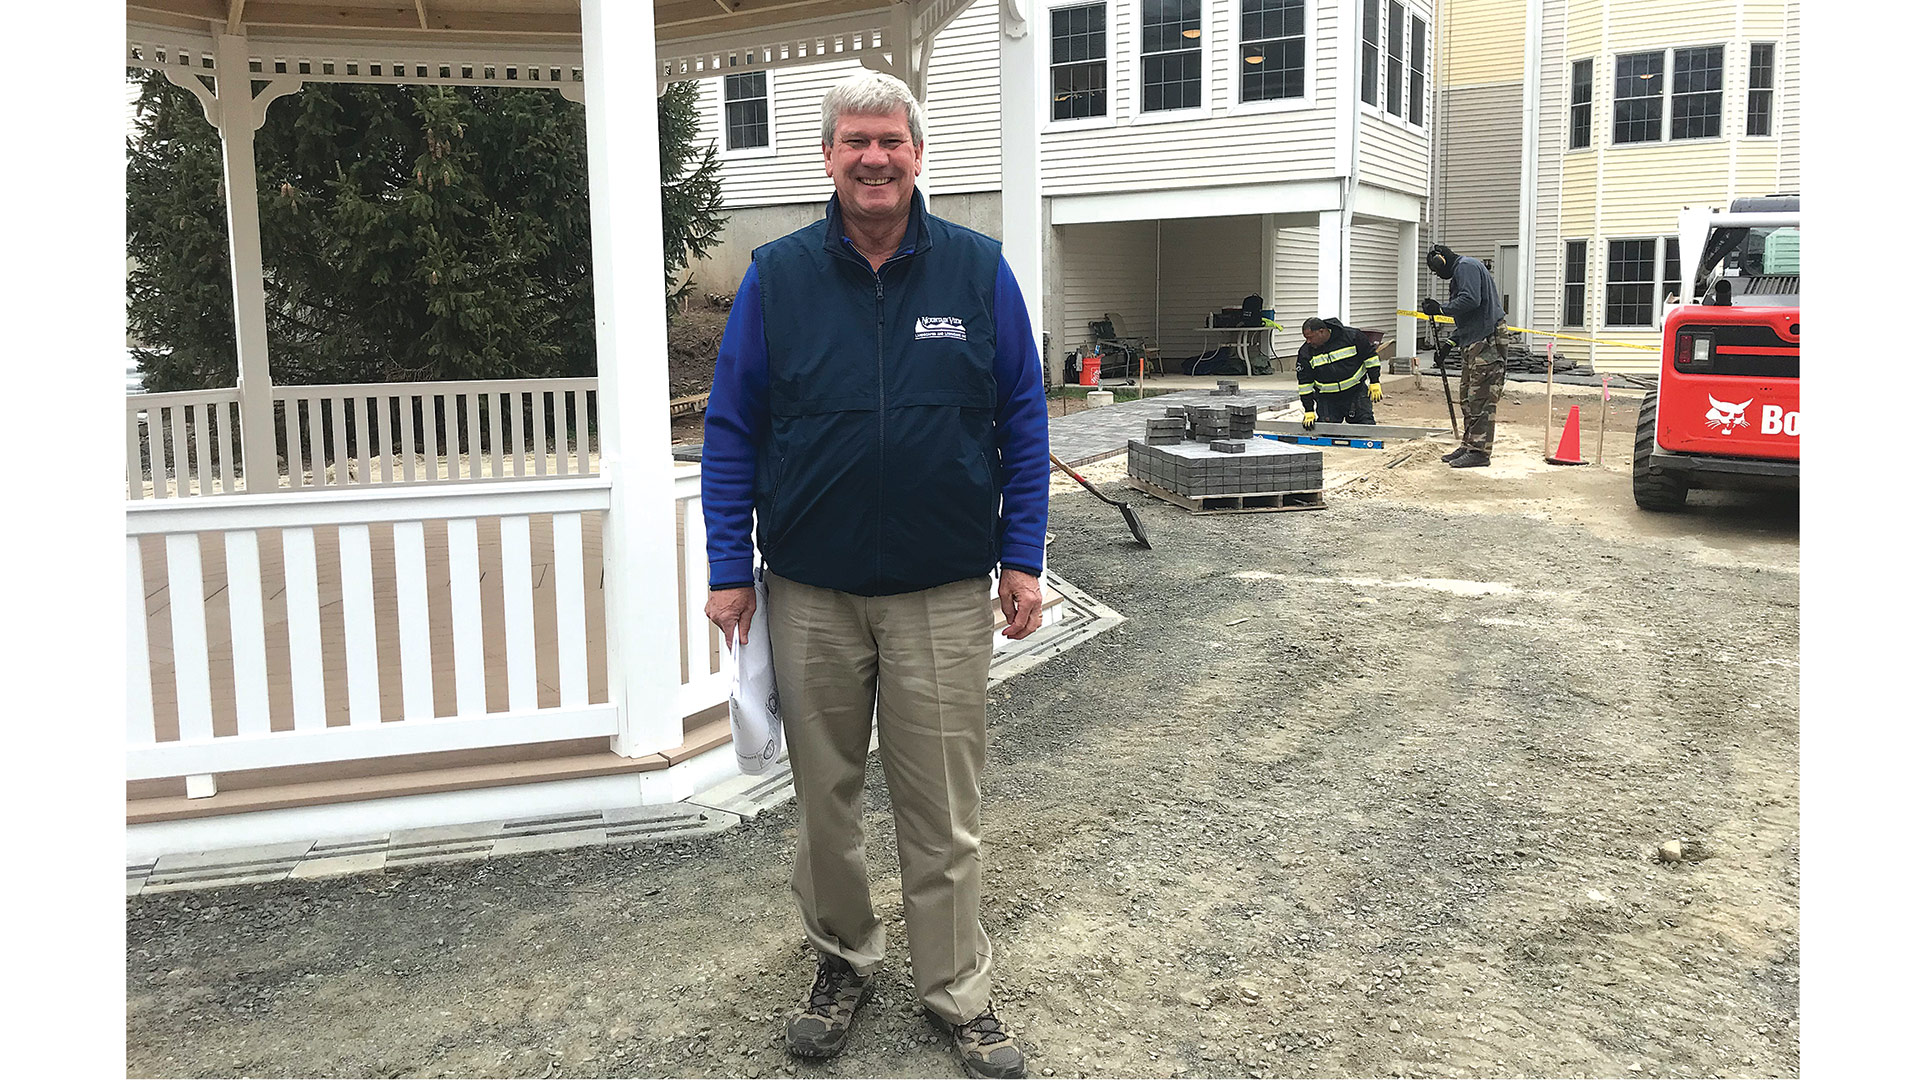 Steve Corrigan leads his crew as they install pavers at Loomis Village in South Hadley